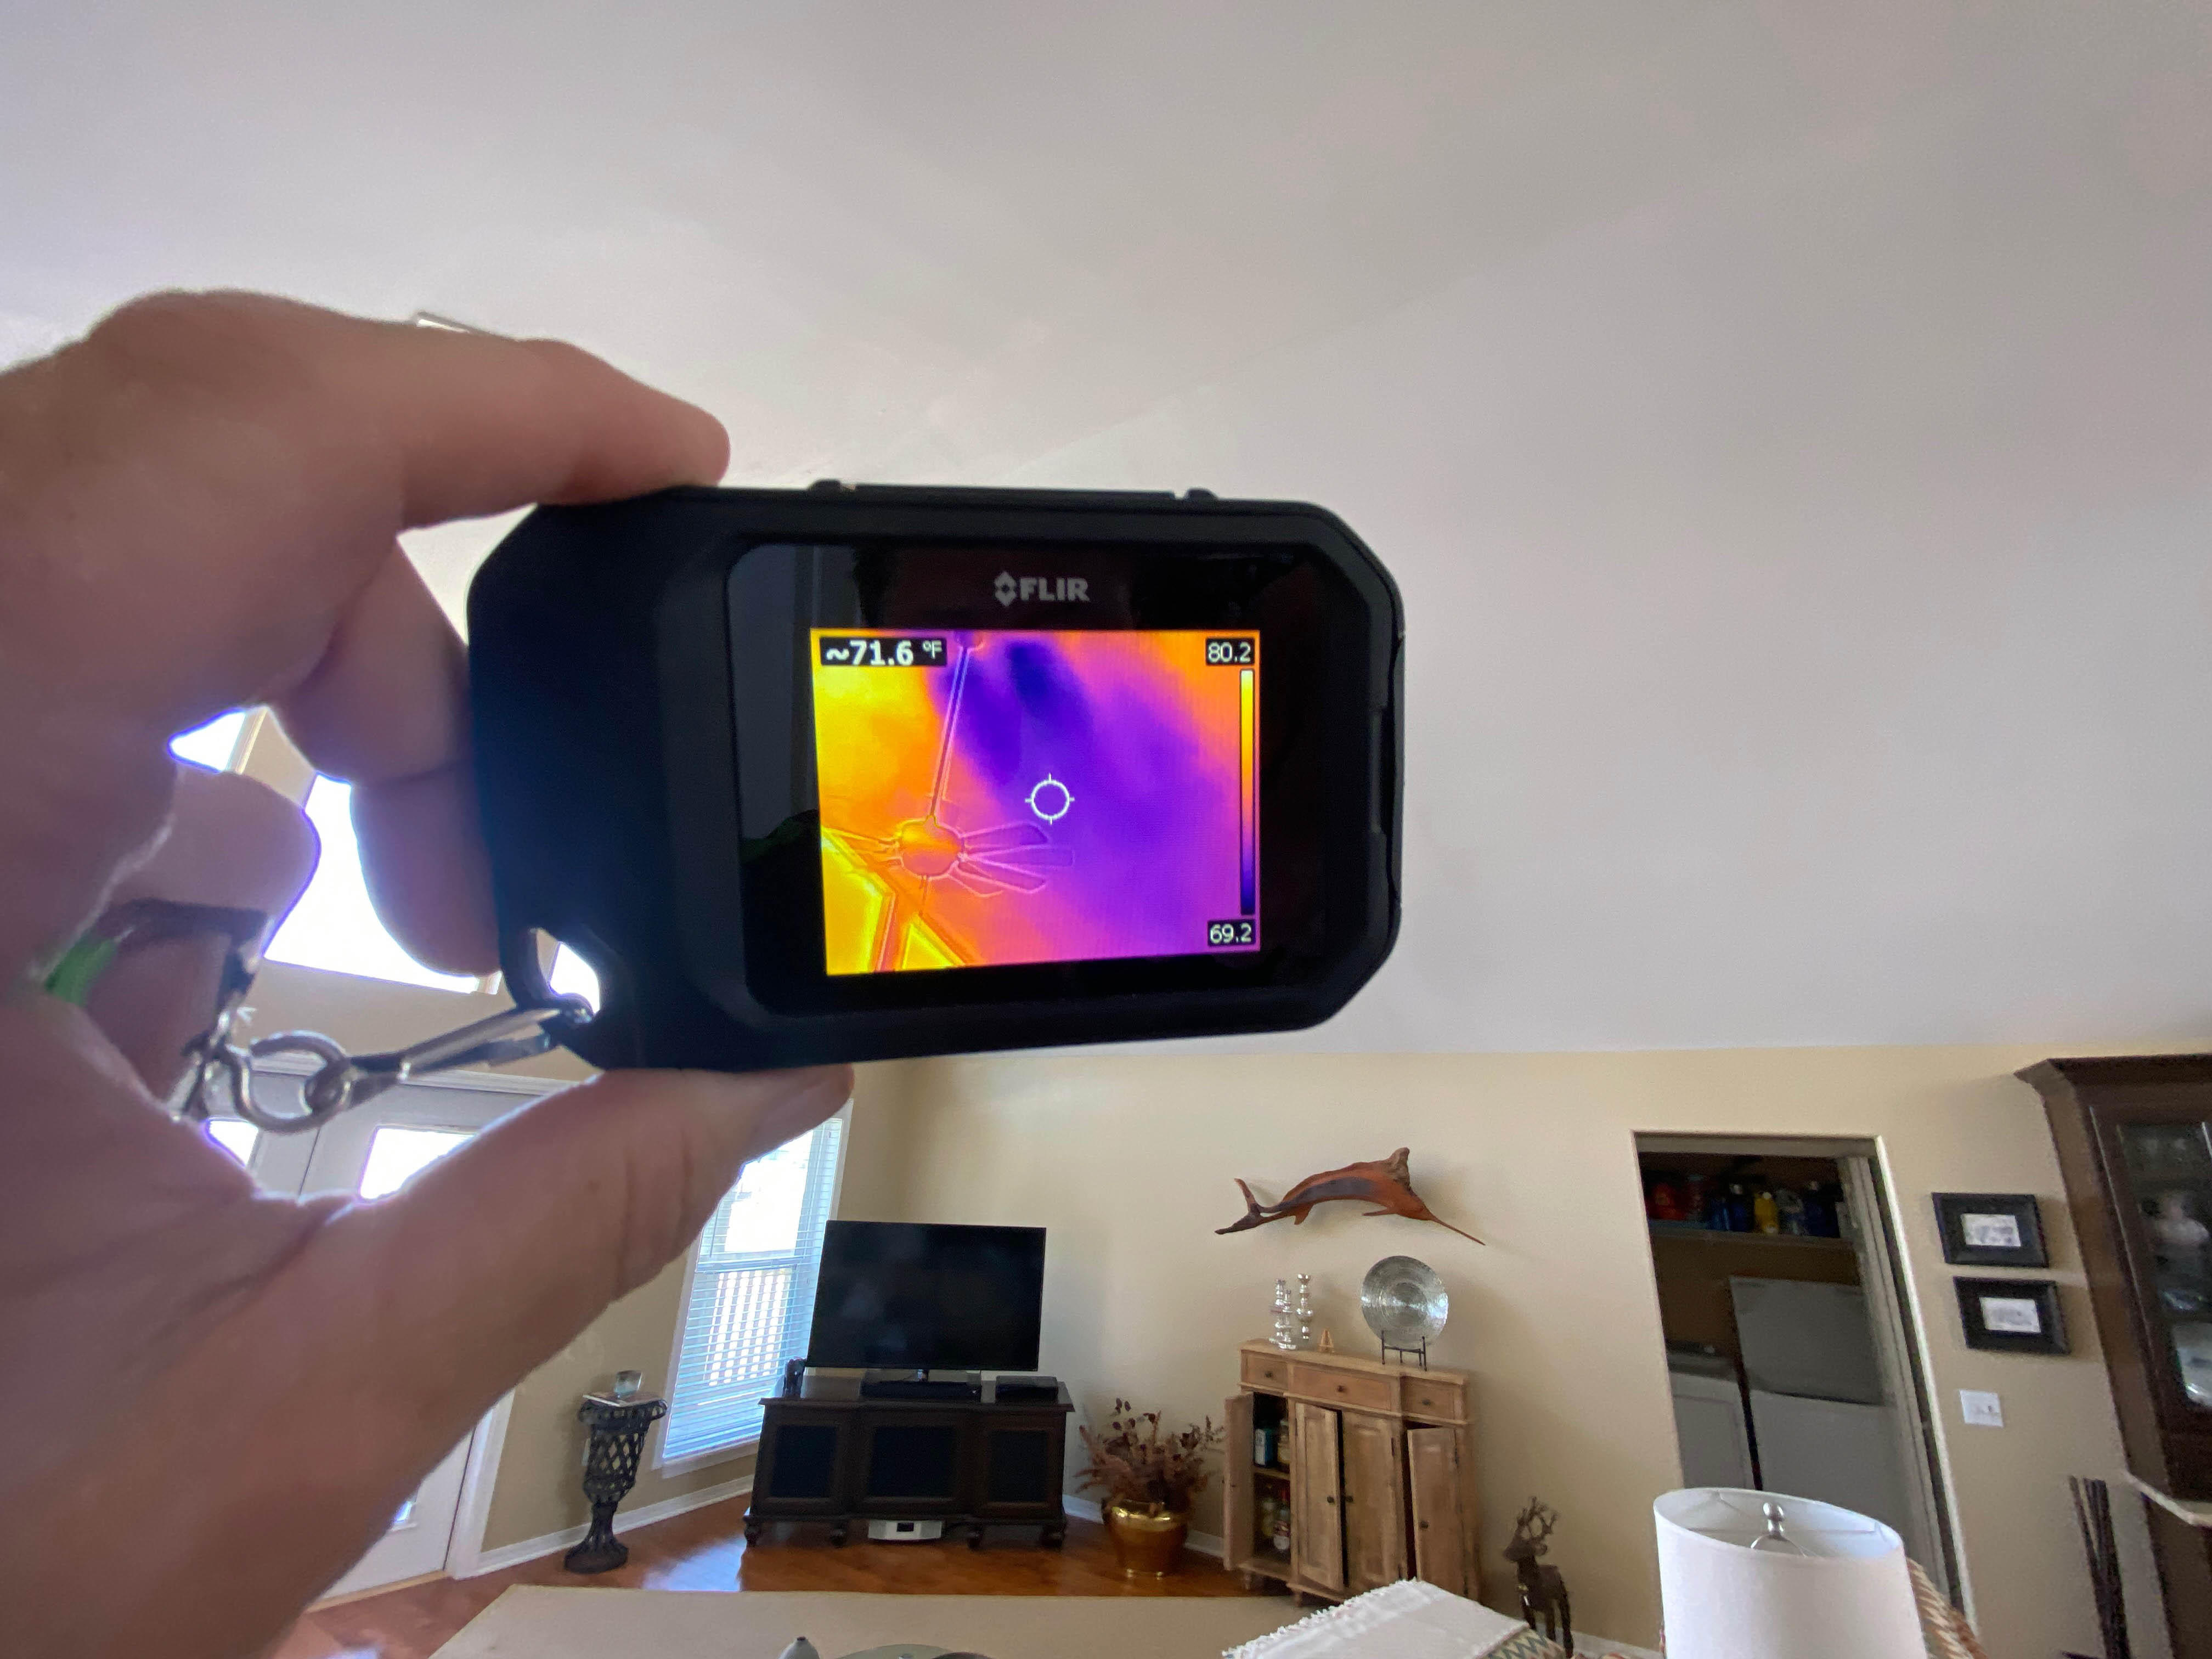 Scientific drying principles rely upon specialized equipment to detect, measure, and monitor a property’s moisture levels. Recent advances, like infrared cameras, can help us detect water through a wall, ceiling, or floor.